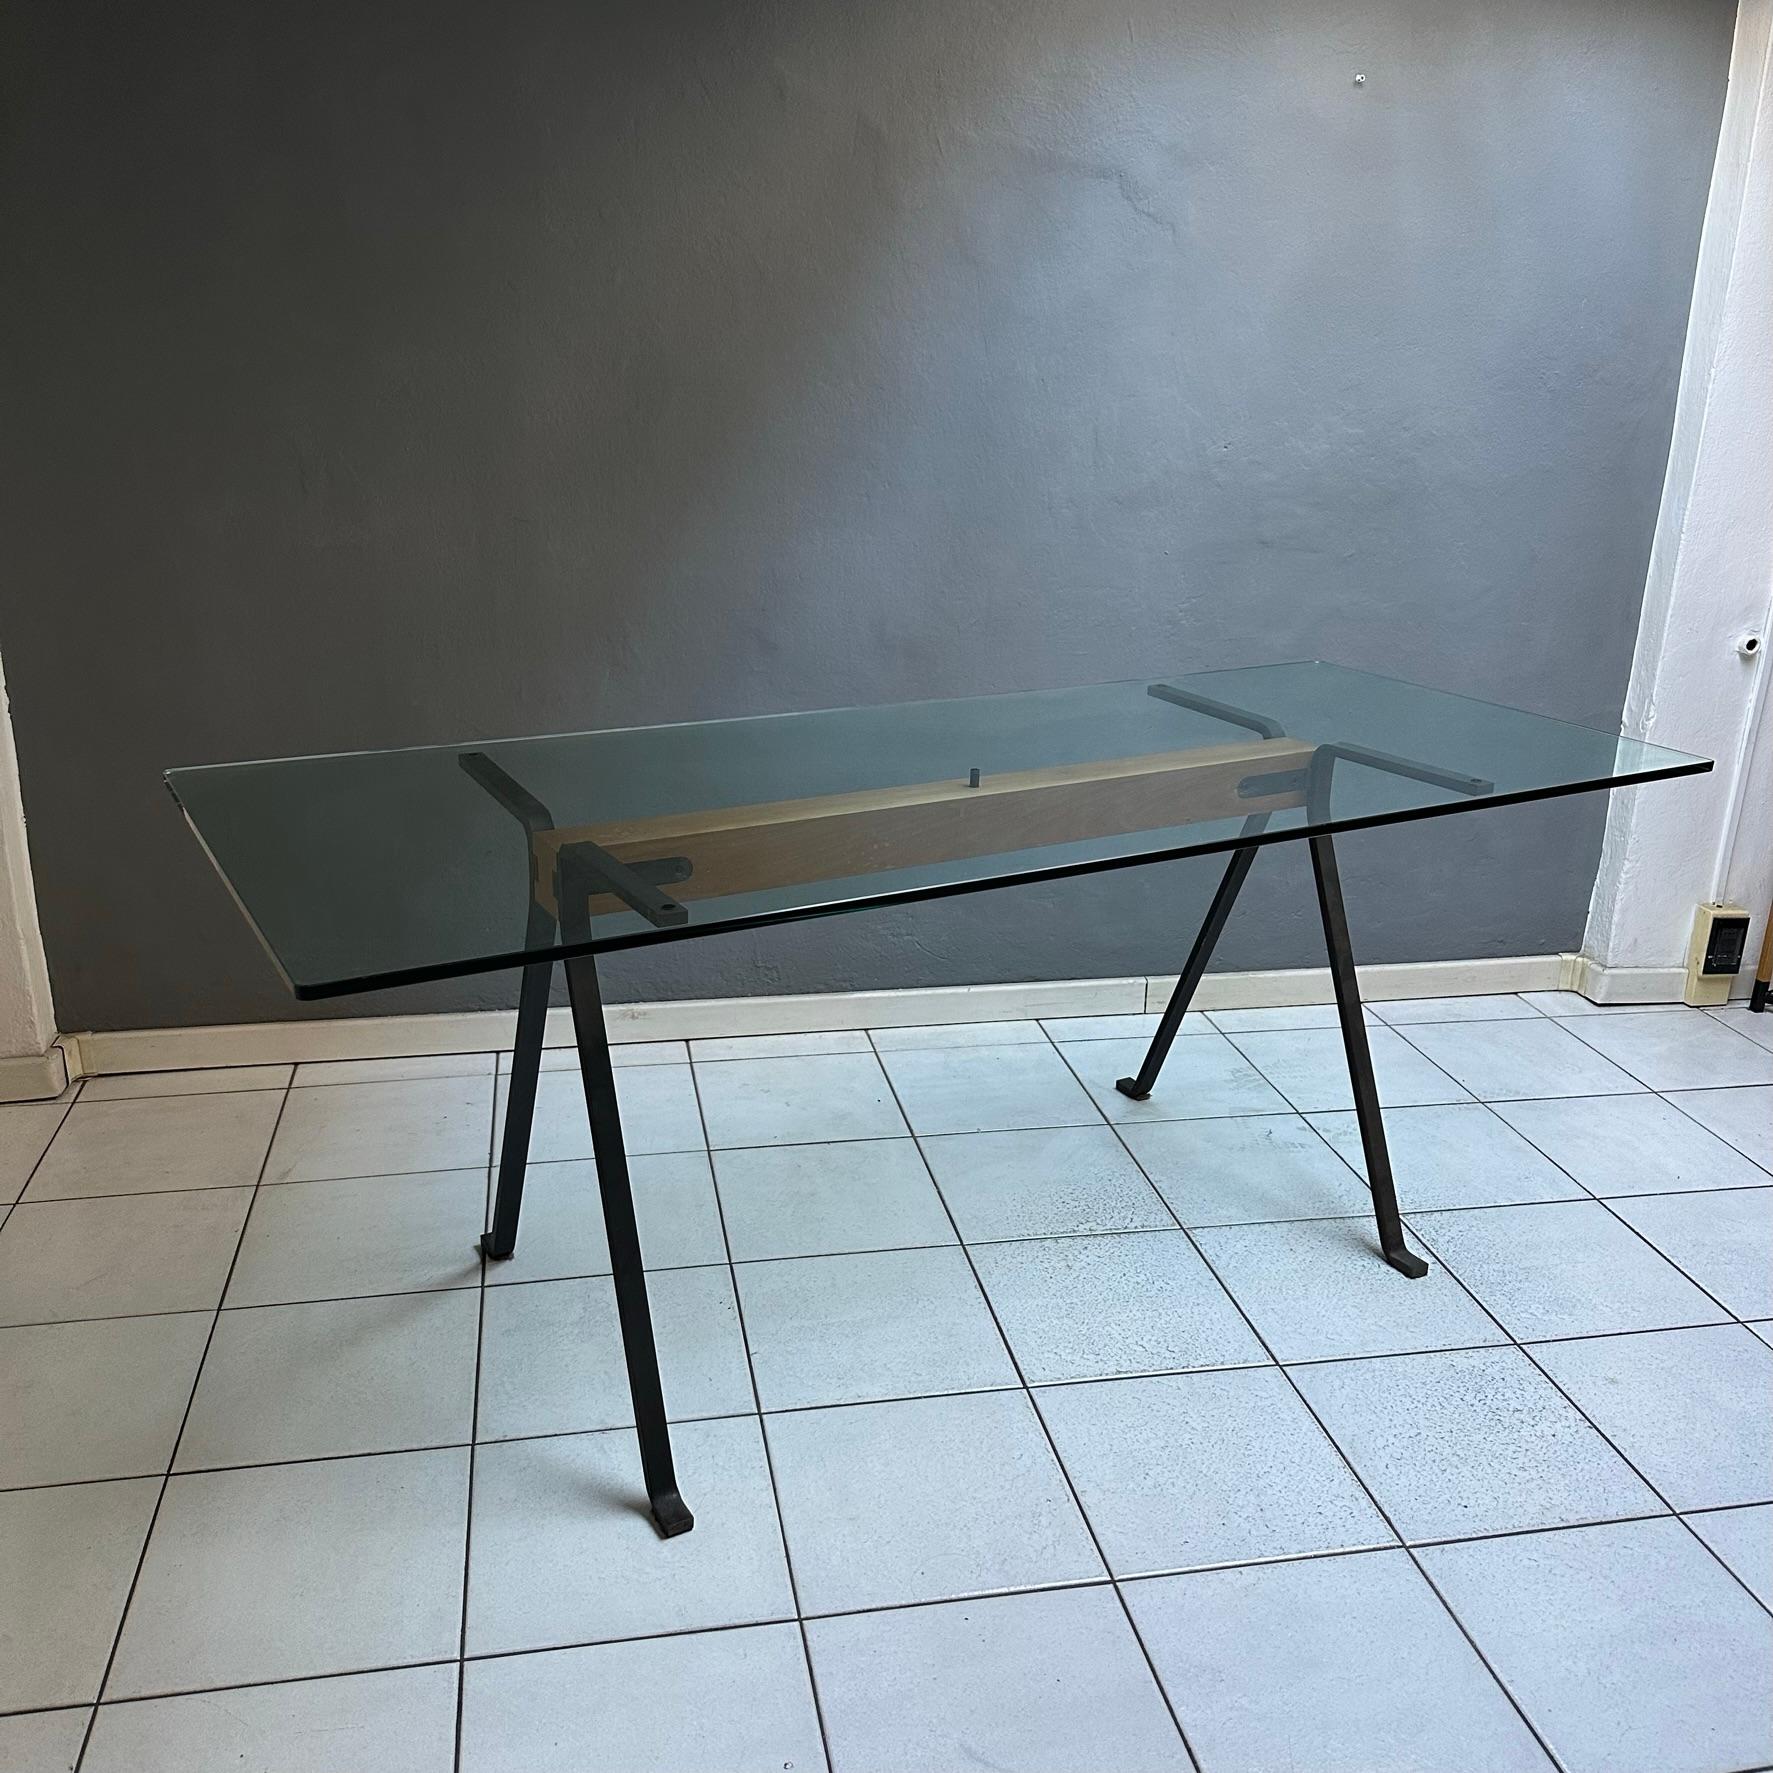 Italian Dining table mod. Frate, designed by Enzo Mari in 1973 produced by Driade For Sale